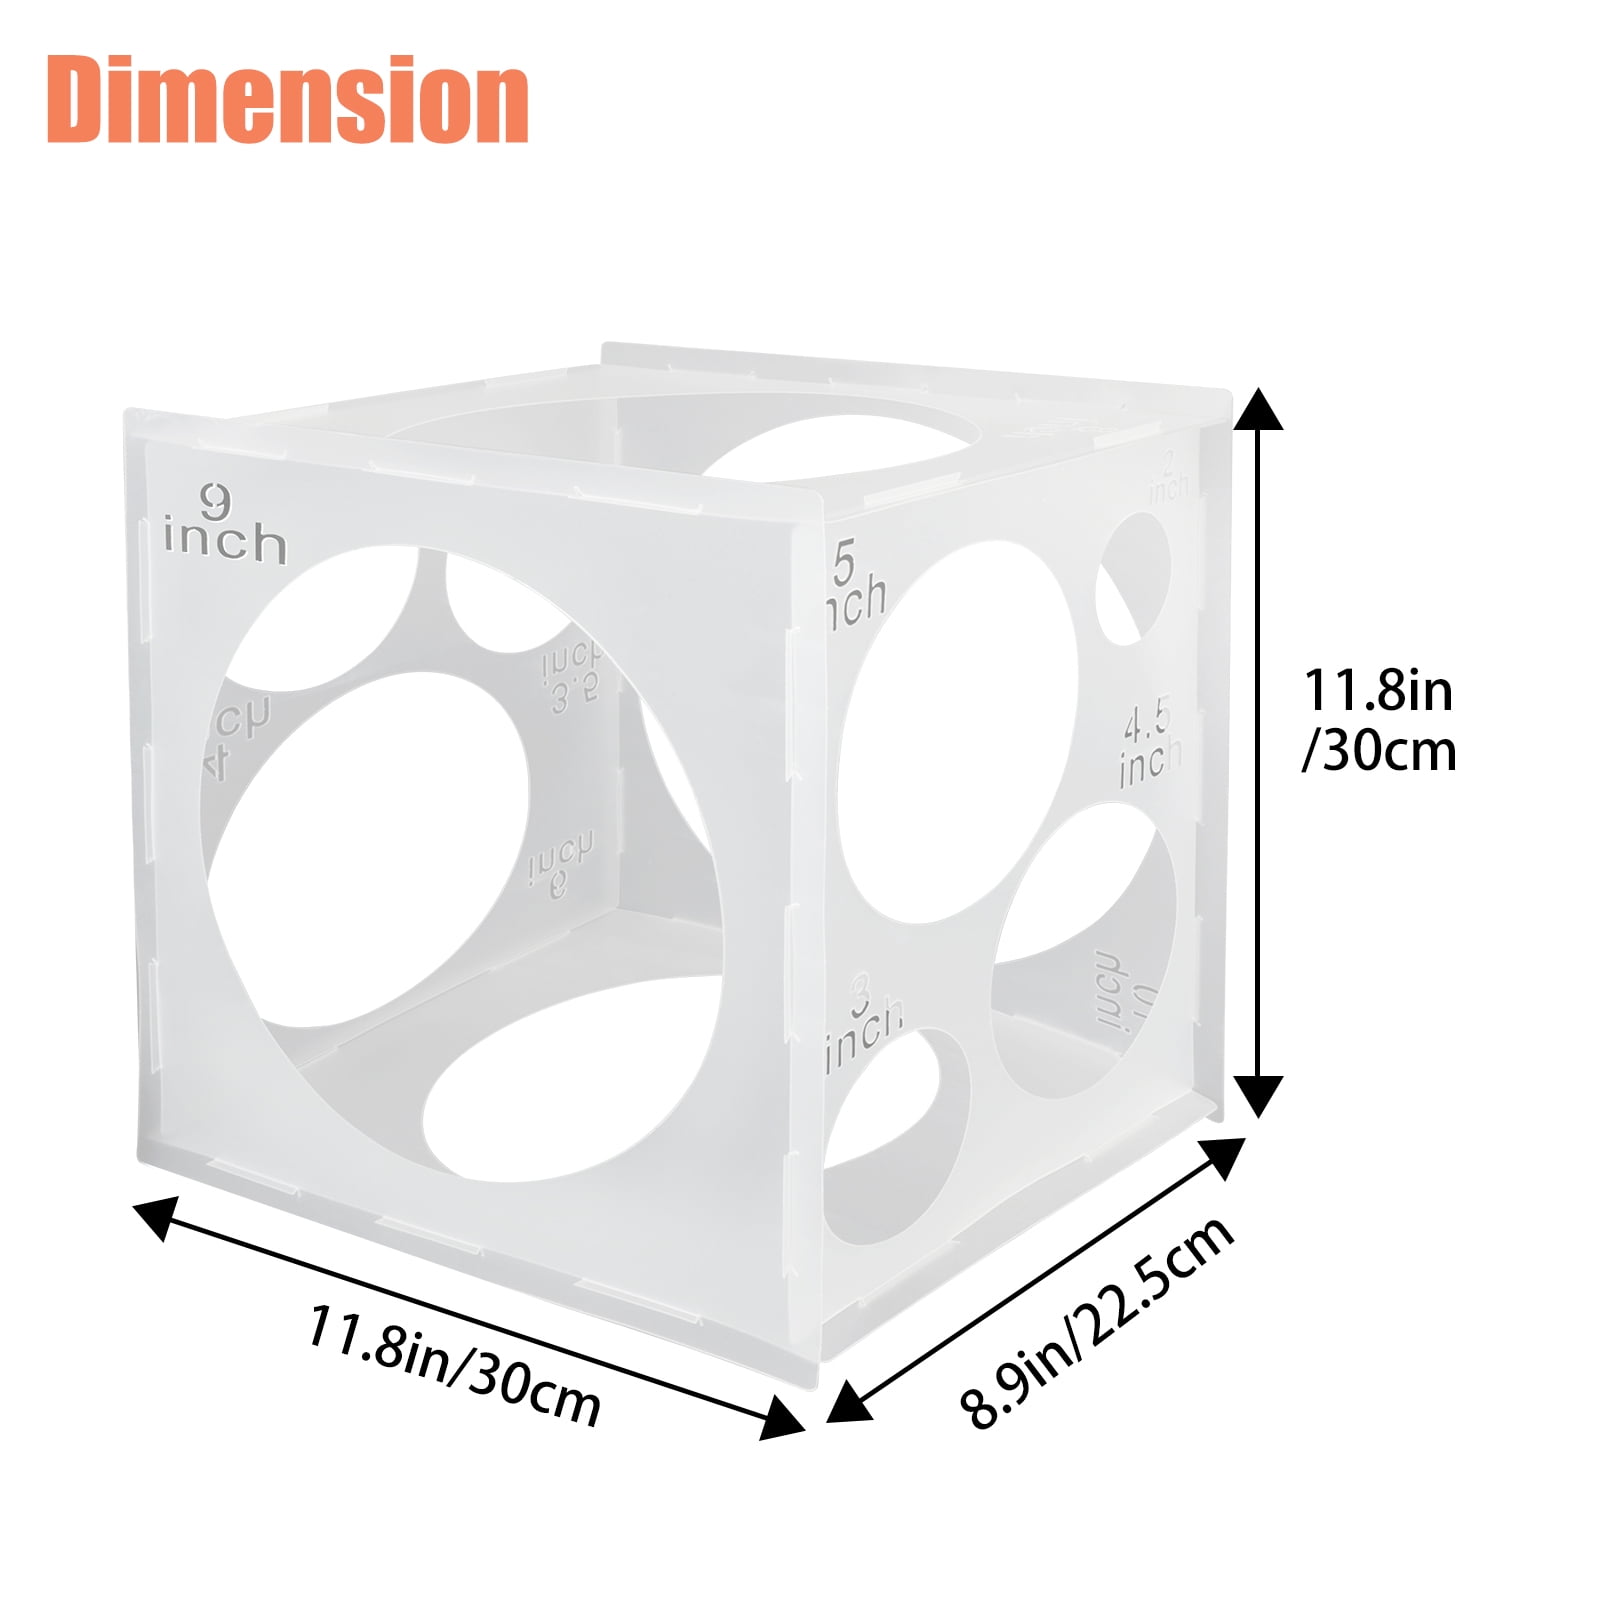 11 Holes Balloon Sizer Box Square Balloon Measurement Tool For Balloon Arch  Birthday Wedding Party Decorations Kids Baby Shower